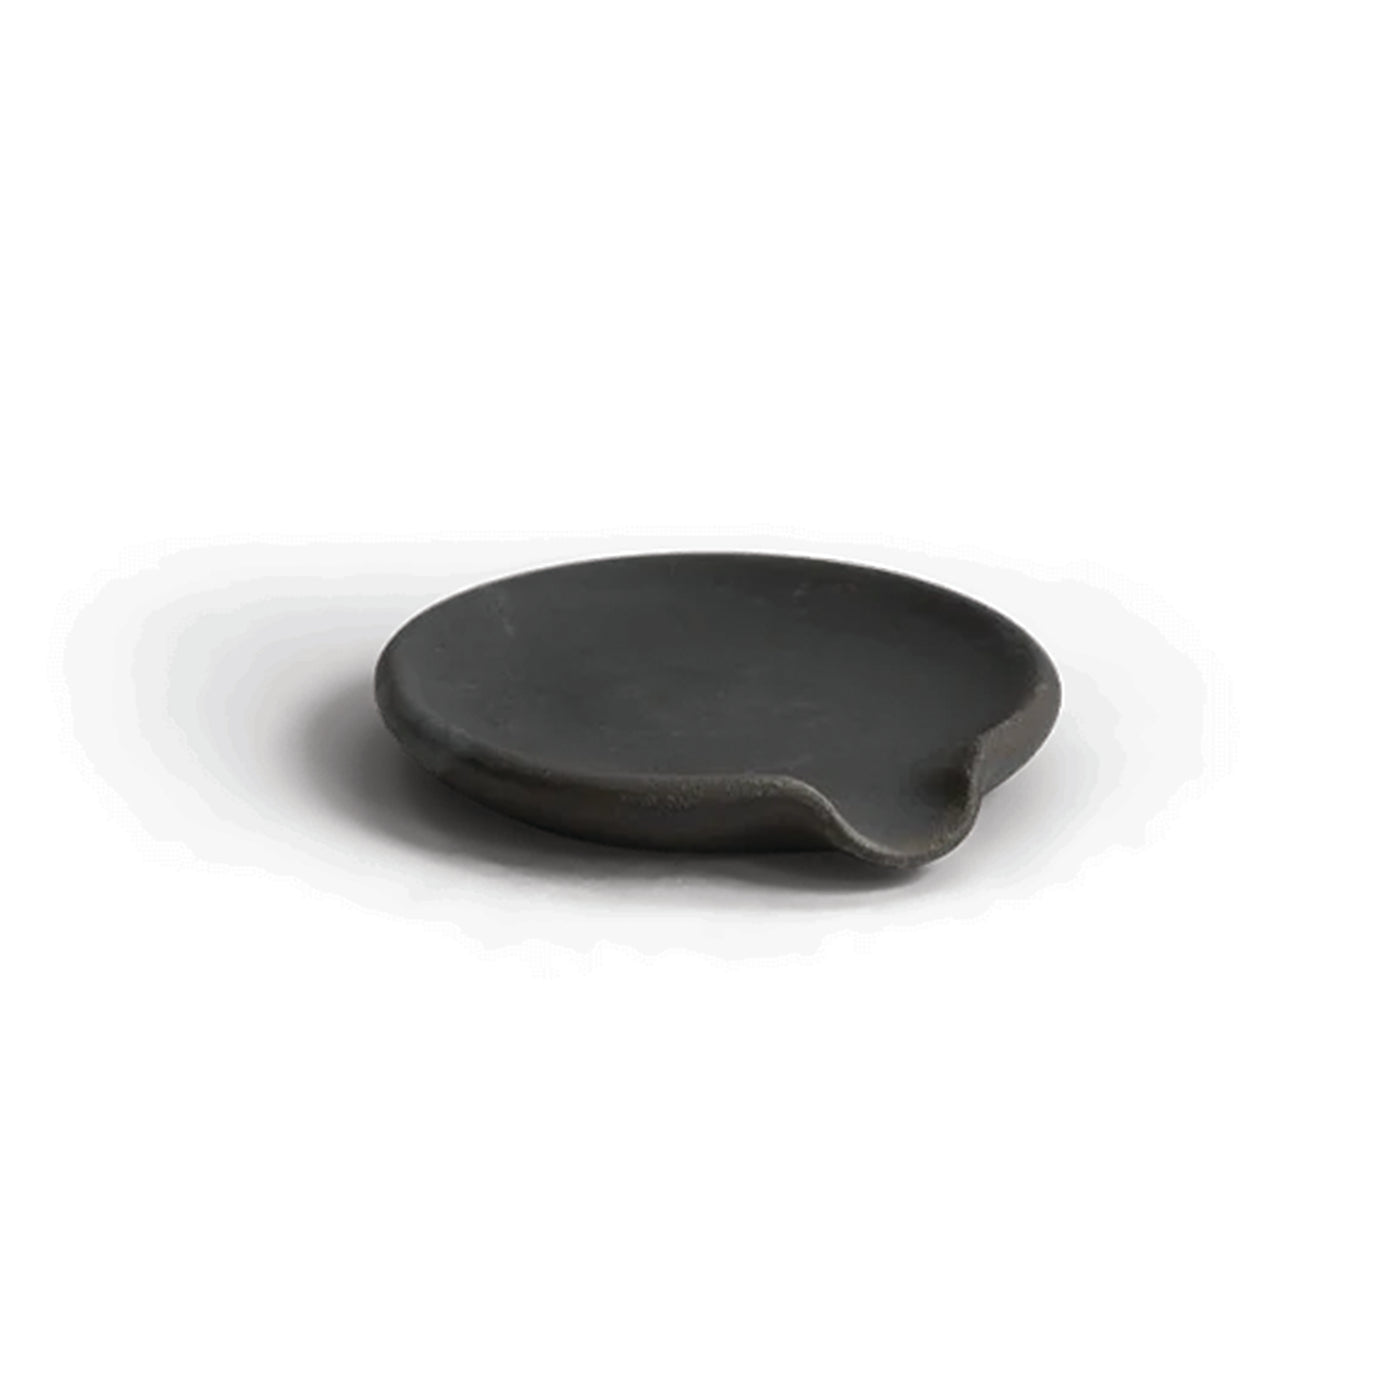 Charcoal Spoon Rest by Campfire Pottery on a white background